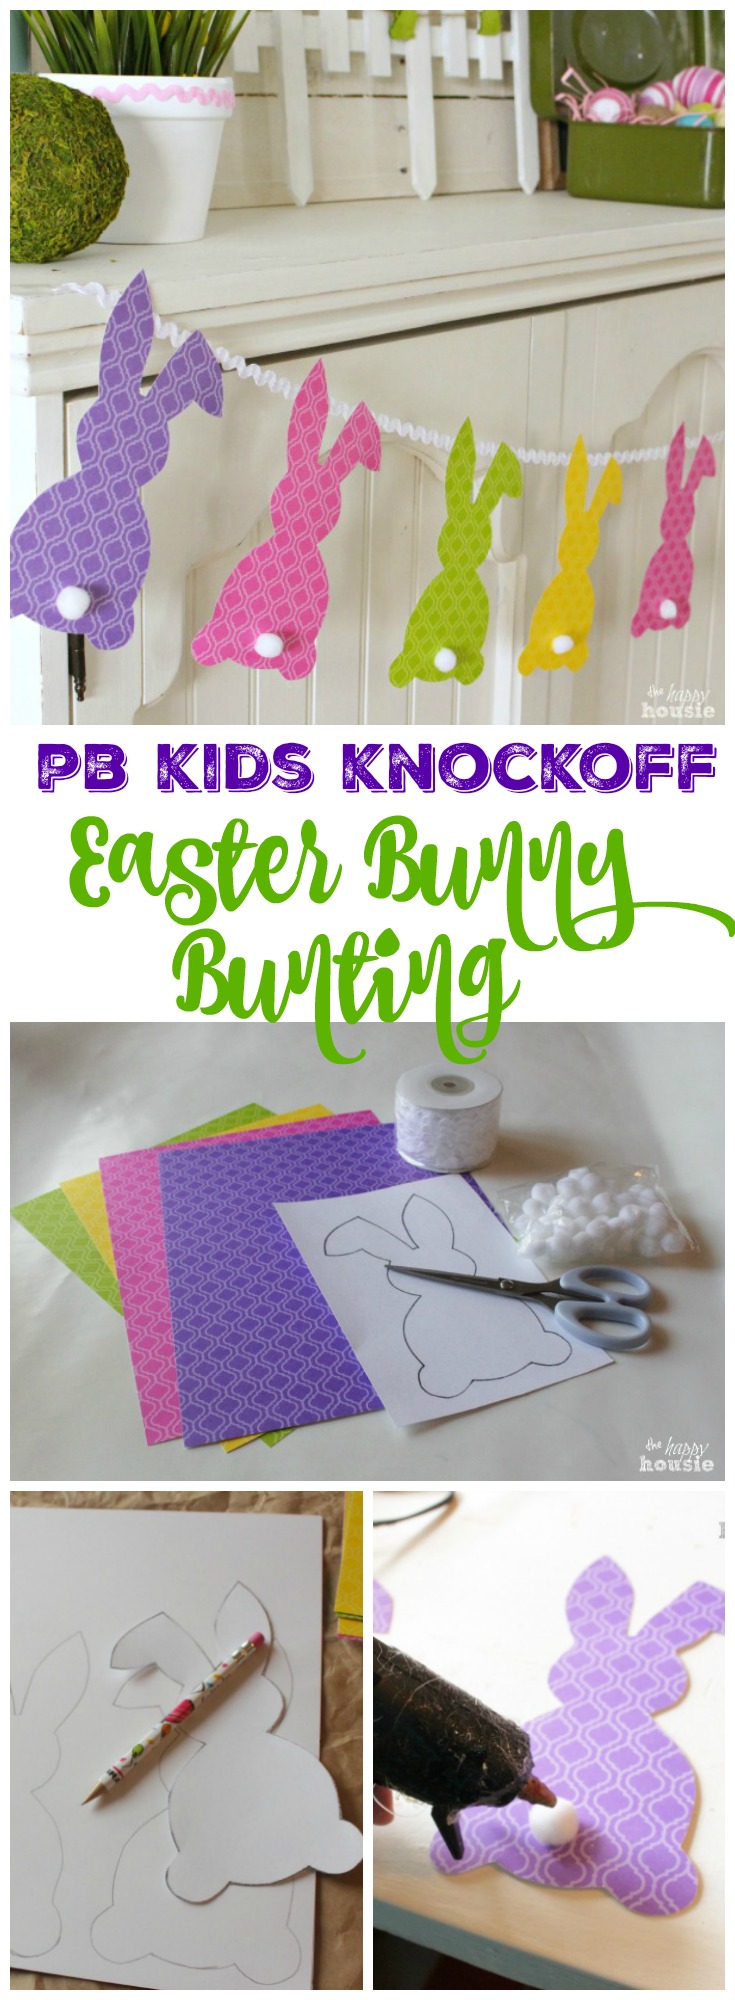 Make your own quick easy and adorable PB Kids Knockoff Easter Bunny Bunting tutorial graphic.